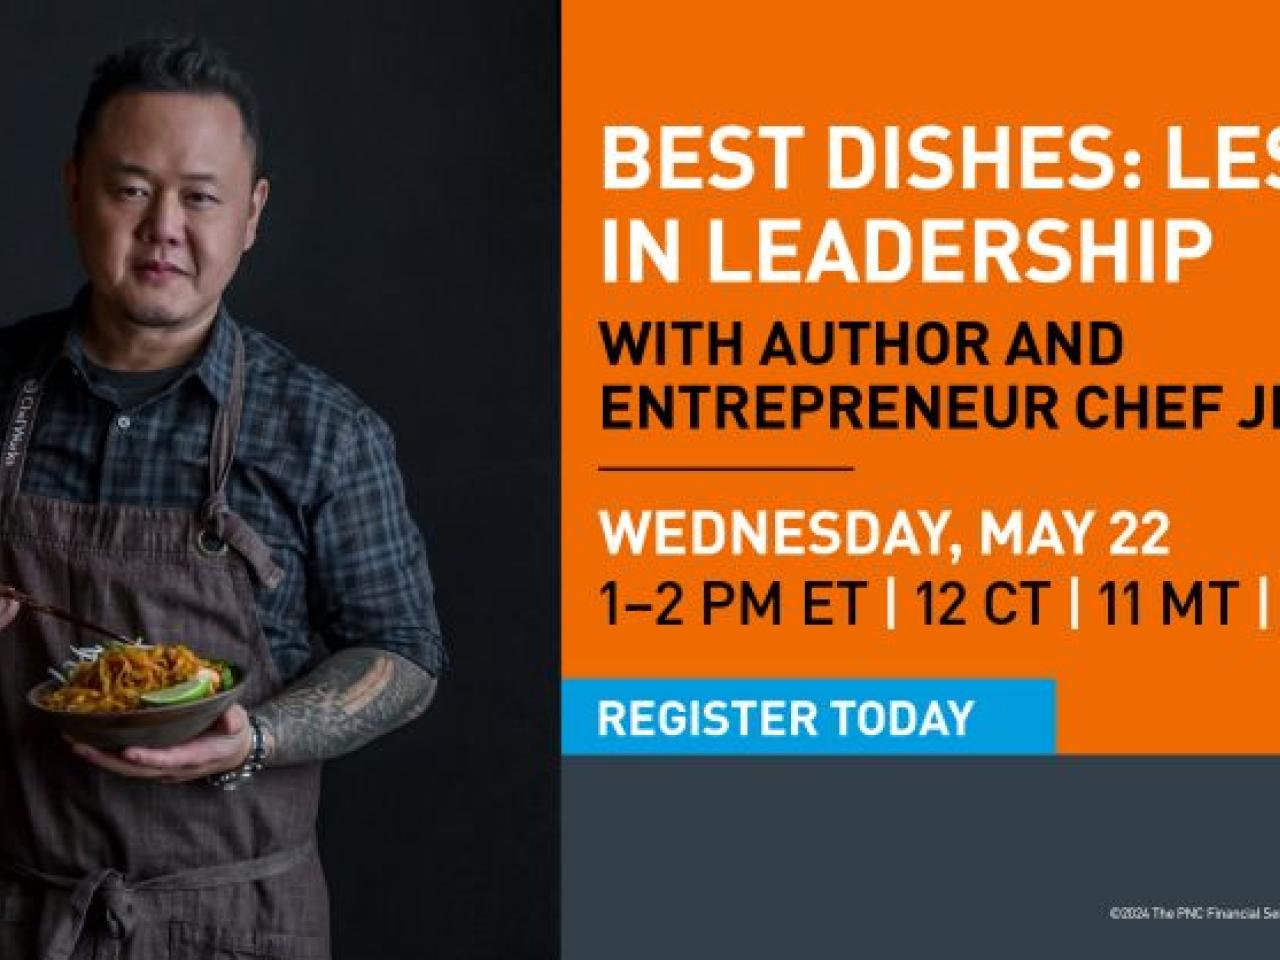 "Best Dishes: Lessons In Leadership"